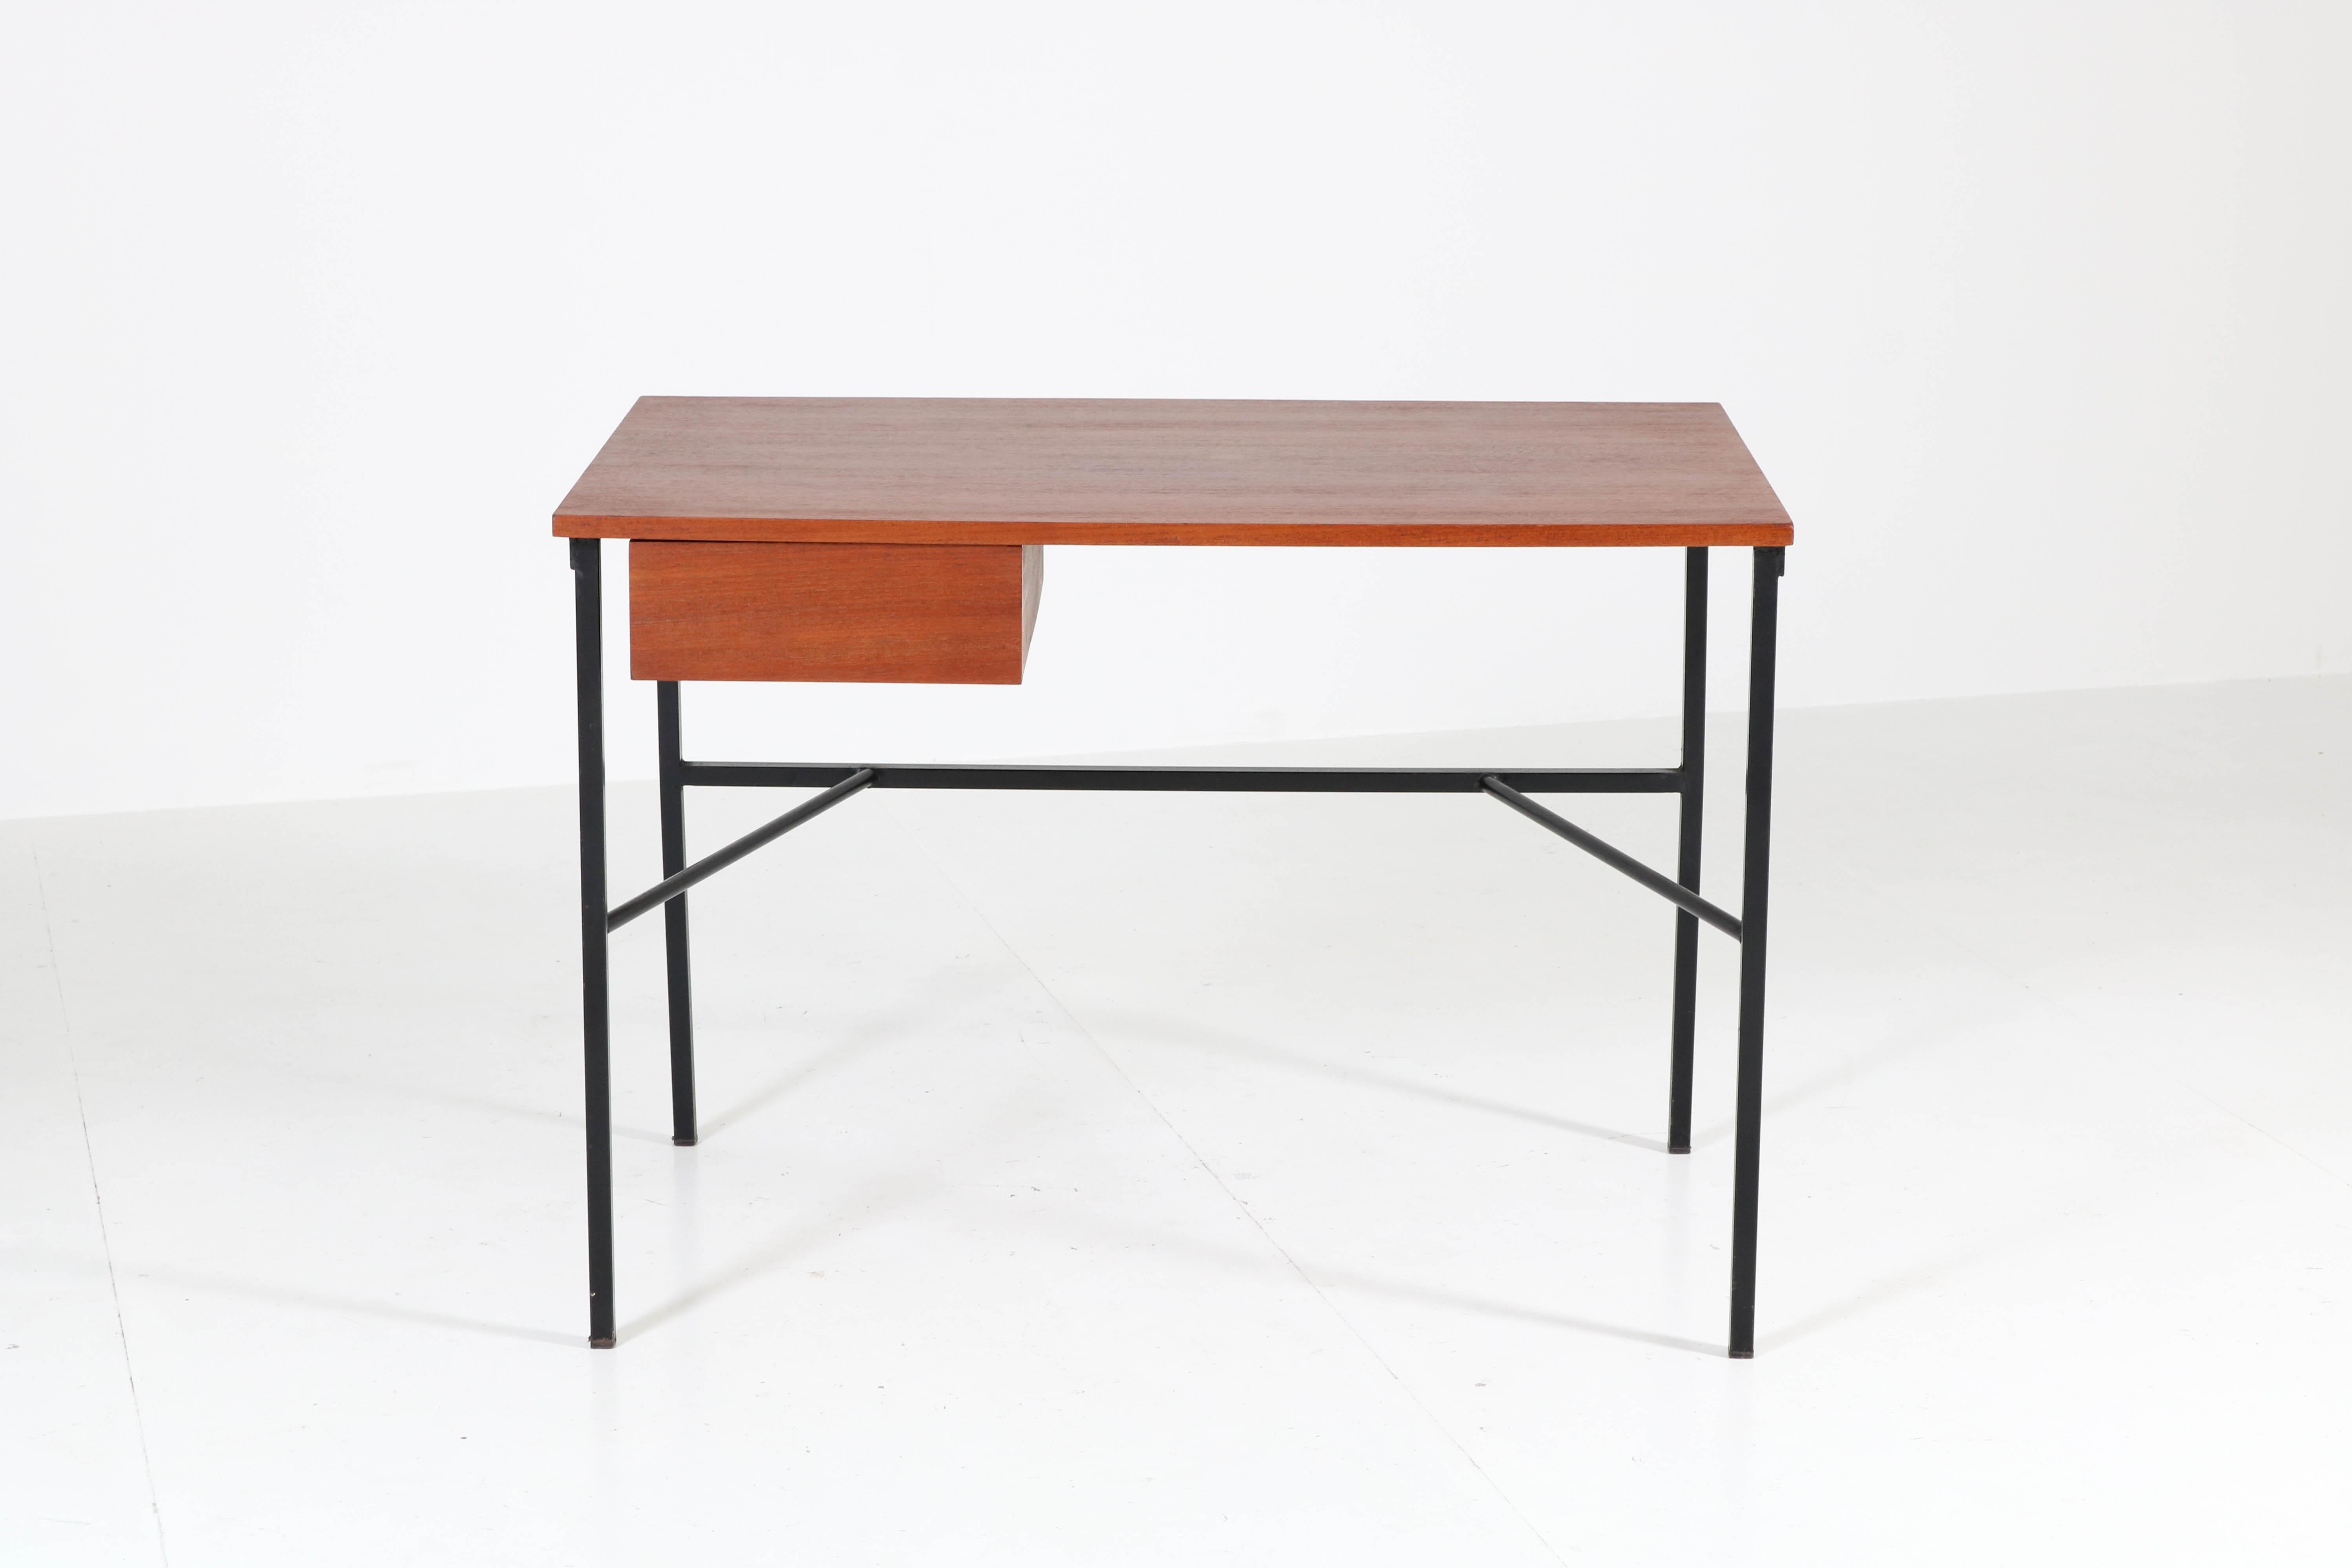 Stunning Mid-Century Modern CM 174 desk.
Design by Pierre Paulin for Trefac Belgium.
Striking design from the 1950s.
This version is rare because the drawer is on the left instead of on the right!
Teak veneered tabletop and drawer with original